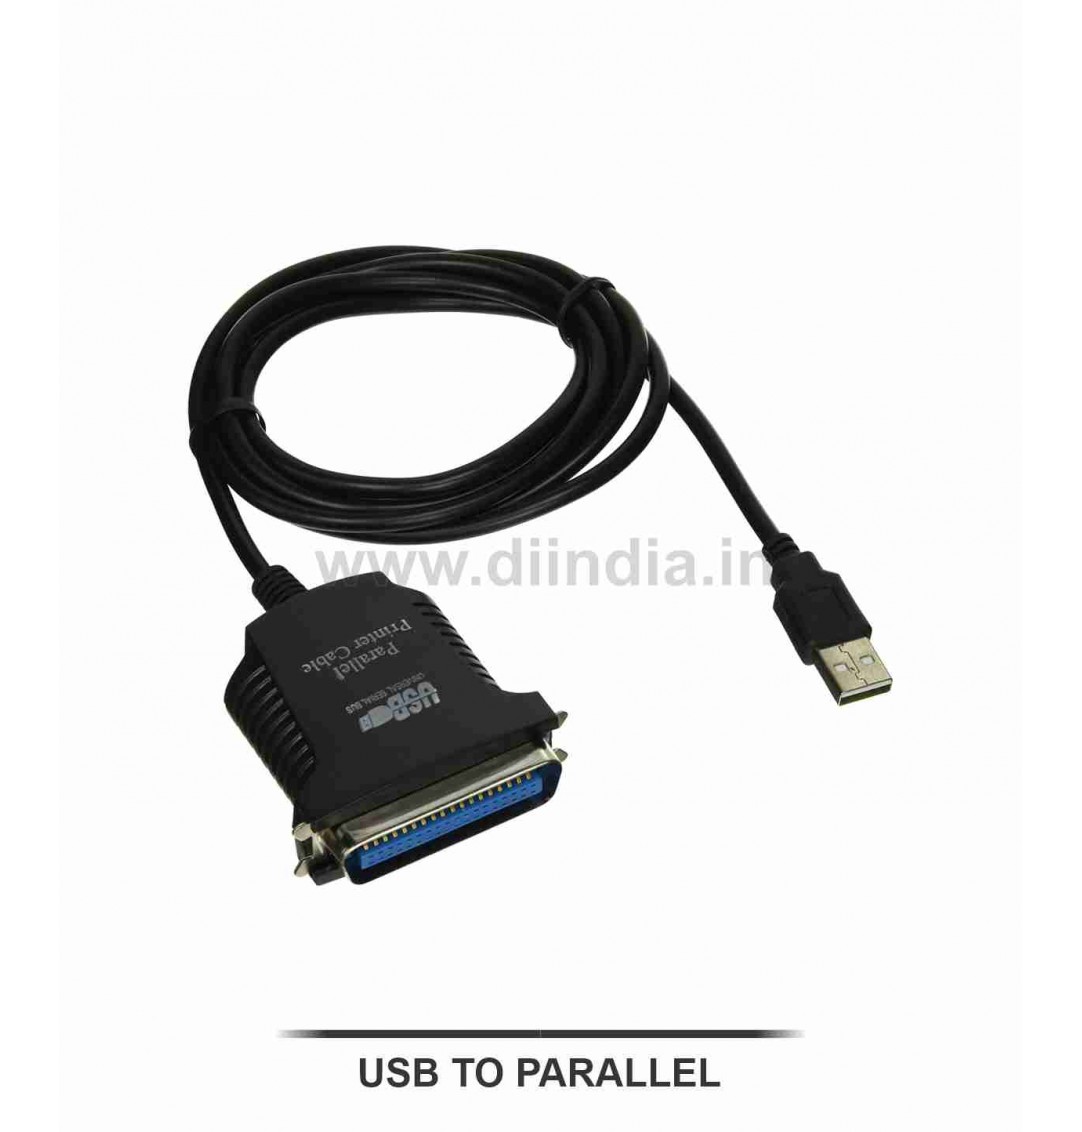 USB TO PARALLEL CABLE 36PIN (USB TO PARALLEL)